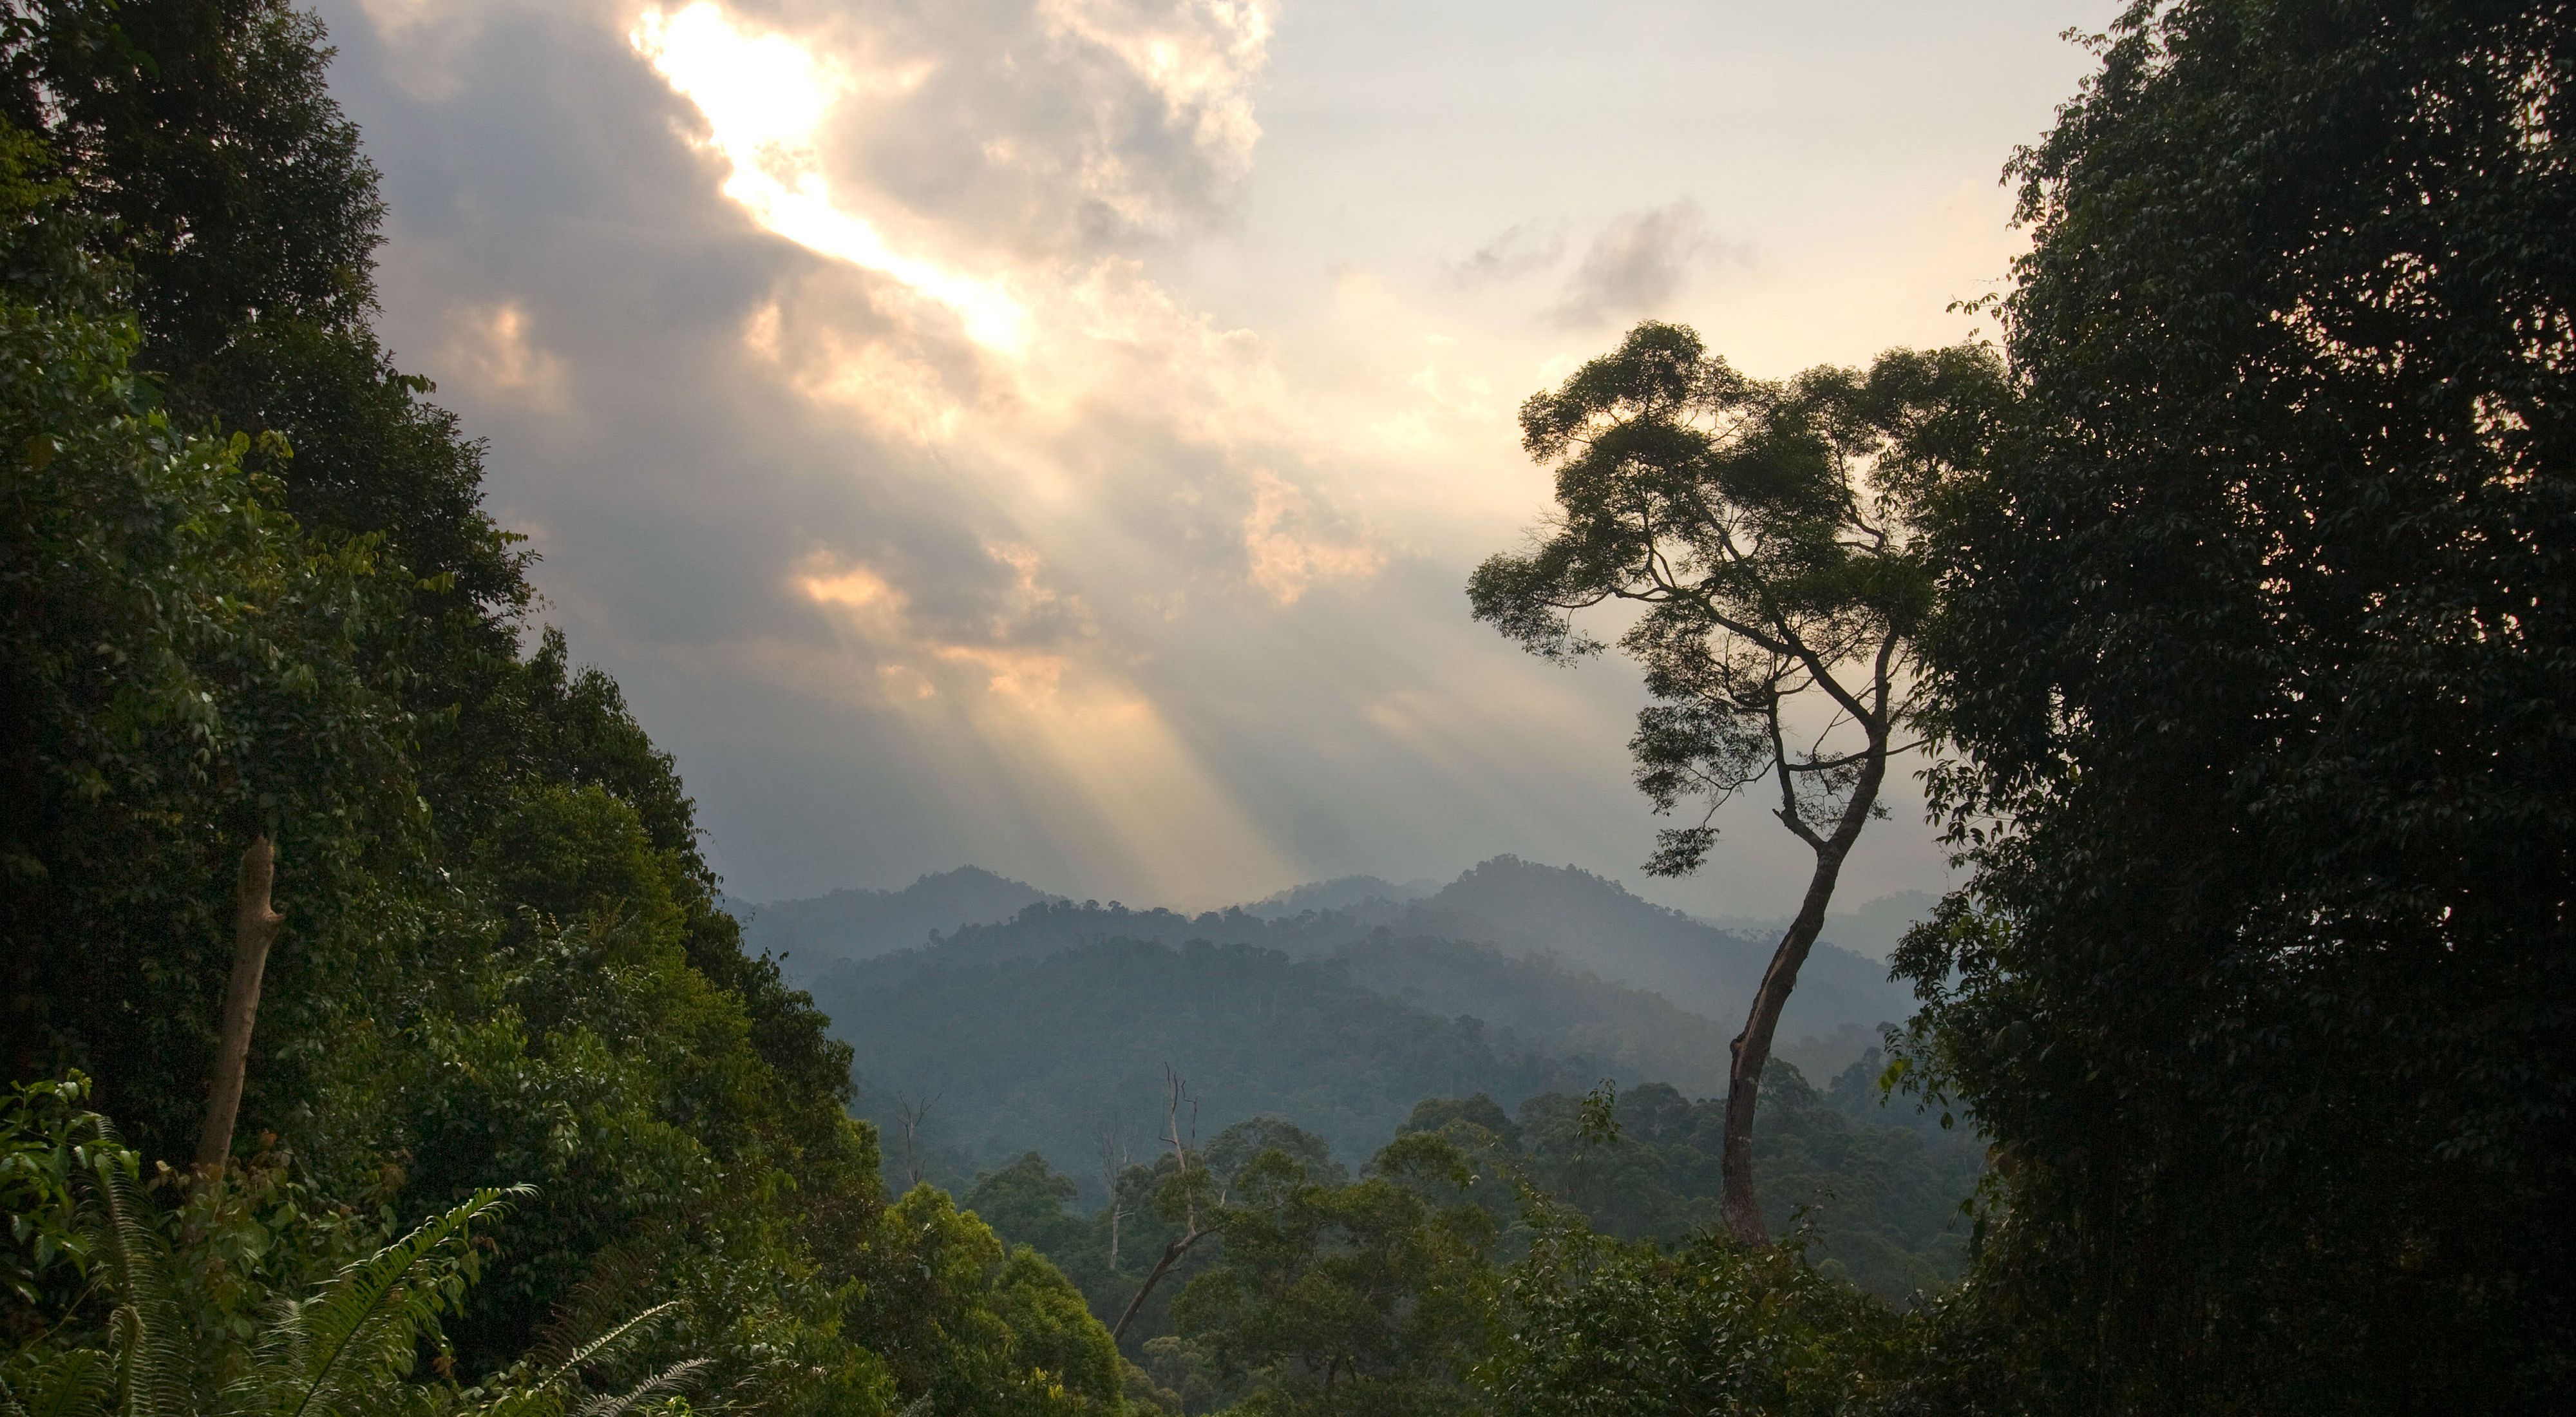 Sunlight streams through the clouds into a dense forest shrouded in mist, with mountains in the far distance.